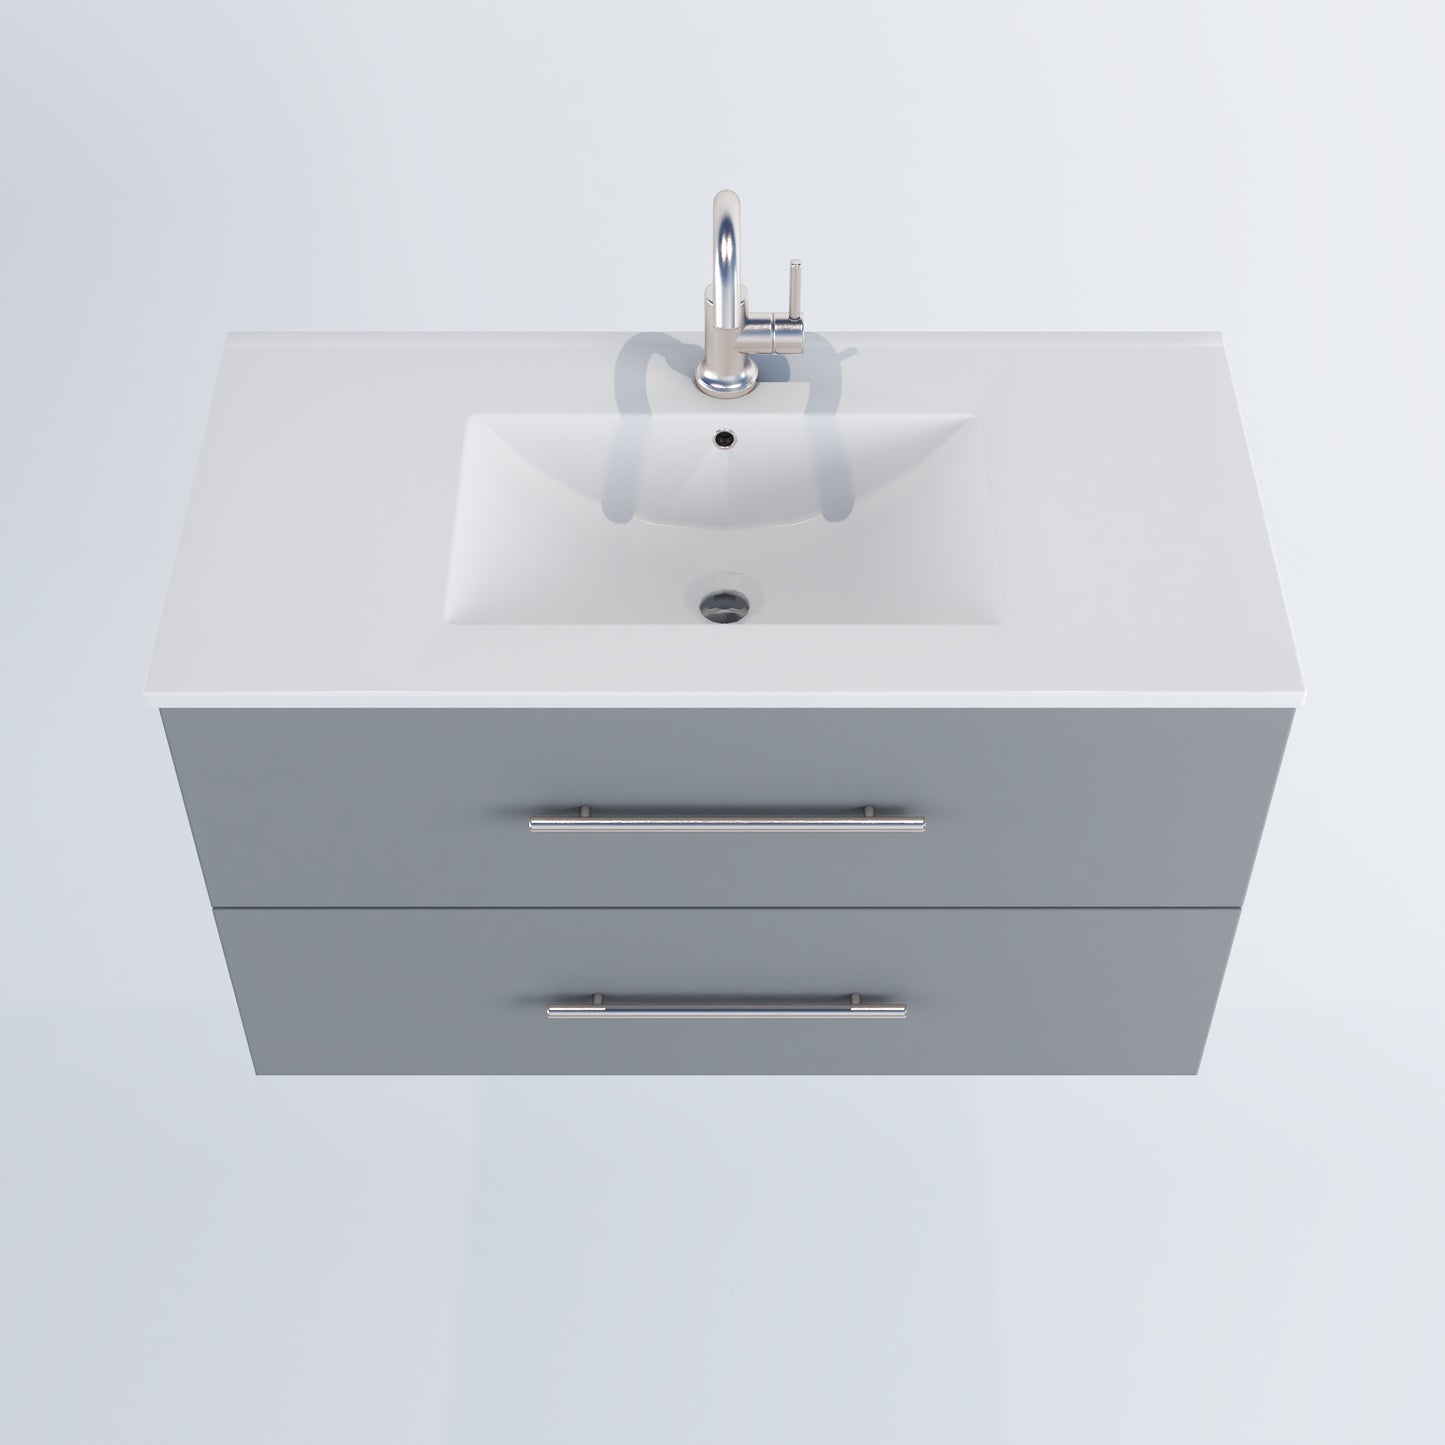 Napa 32" Bathroom Vanity with integrated counter top